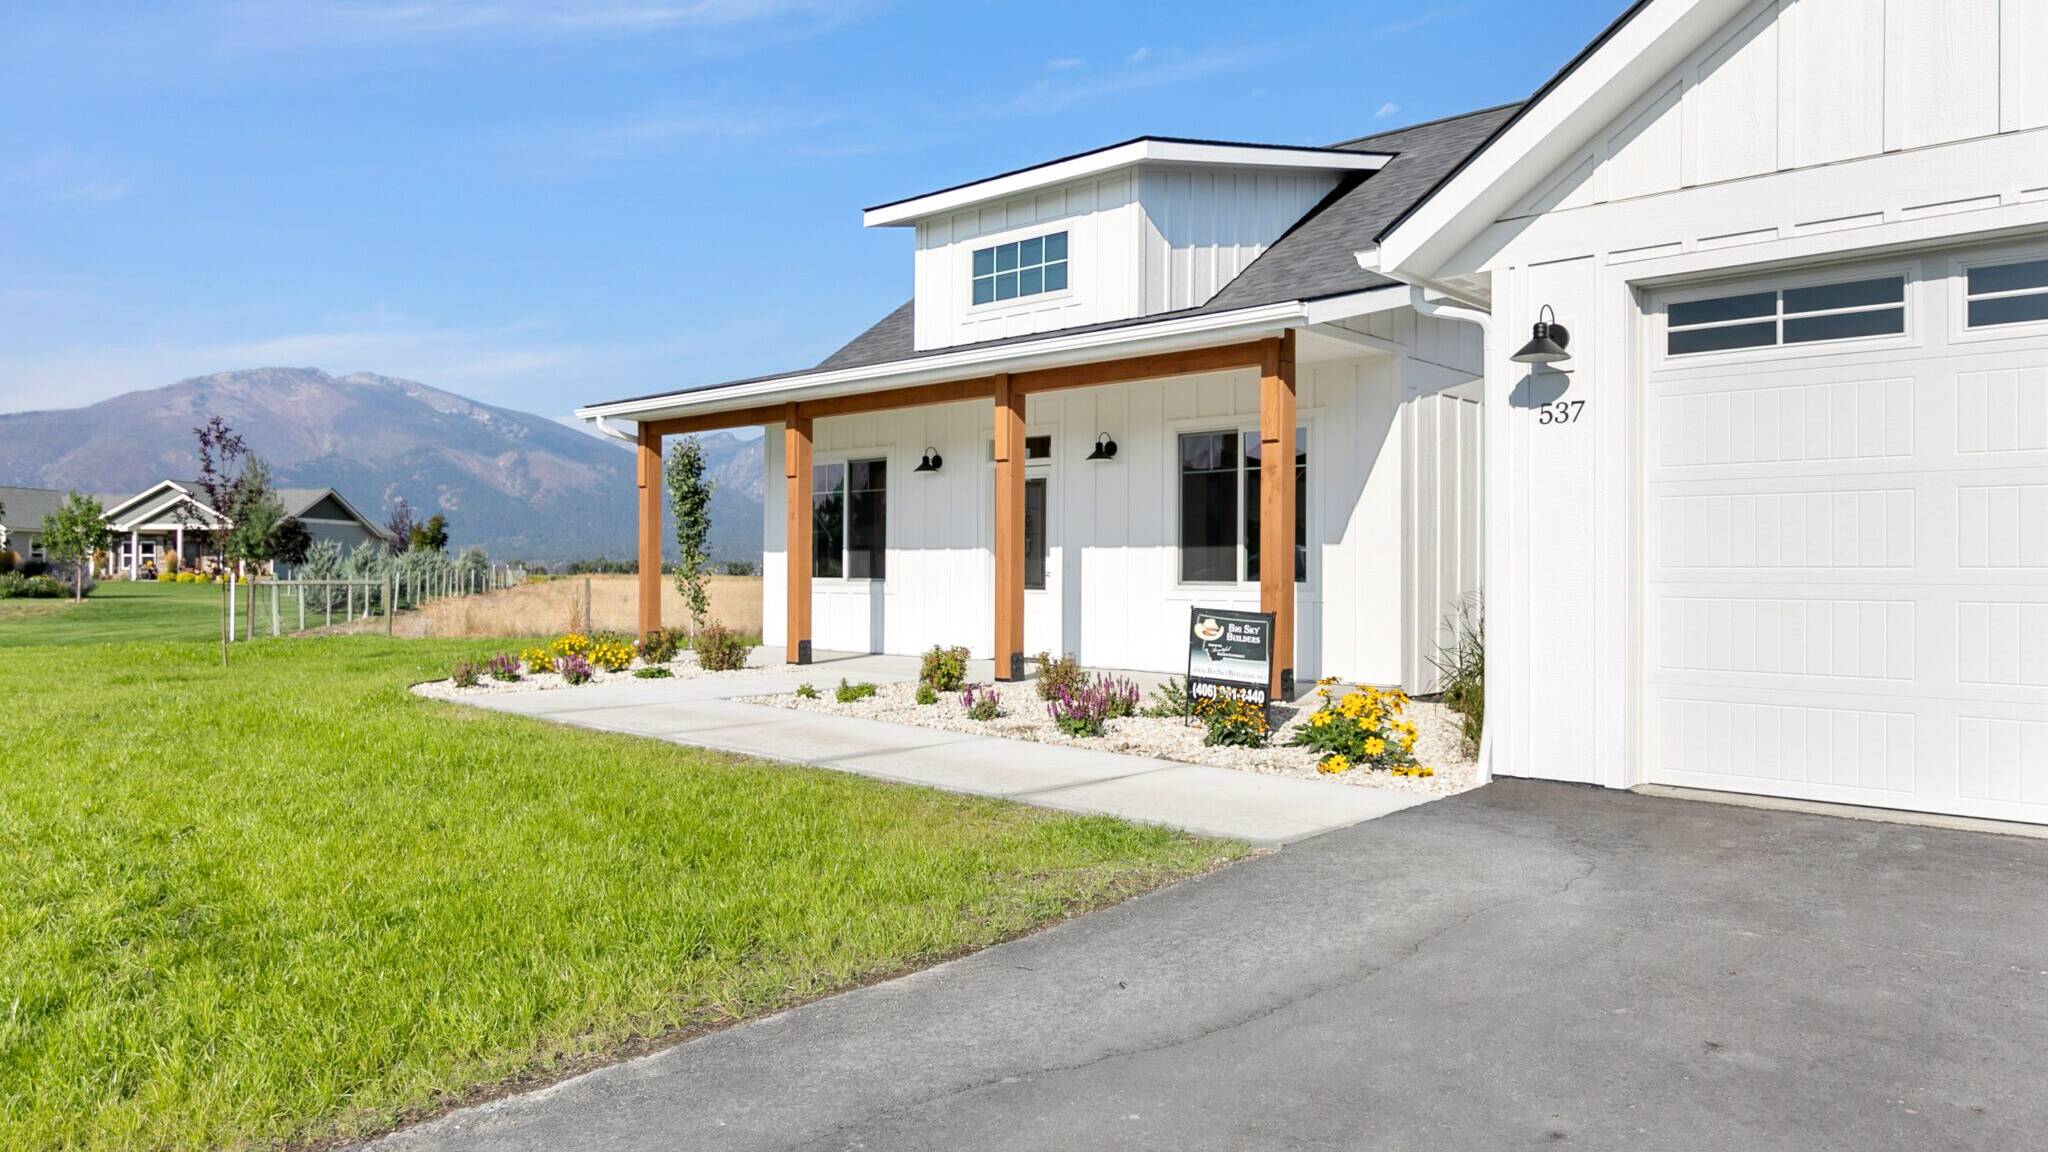 House Exterior of The Seeley model home - Built by Big Sky Builder in Hamilton, MT